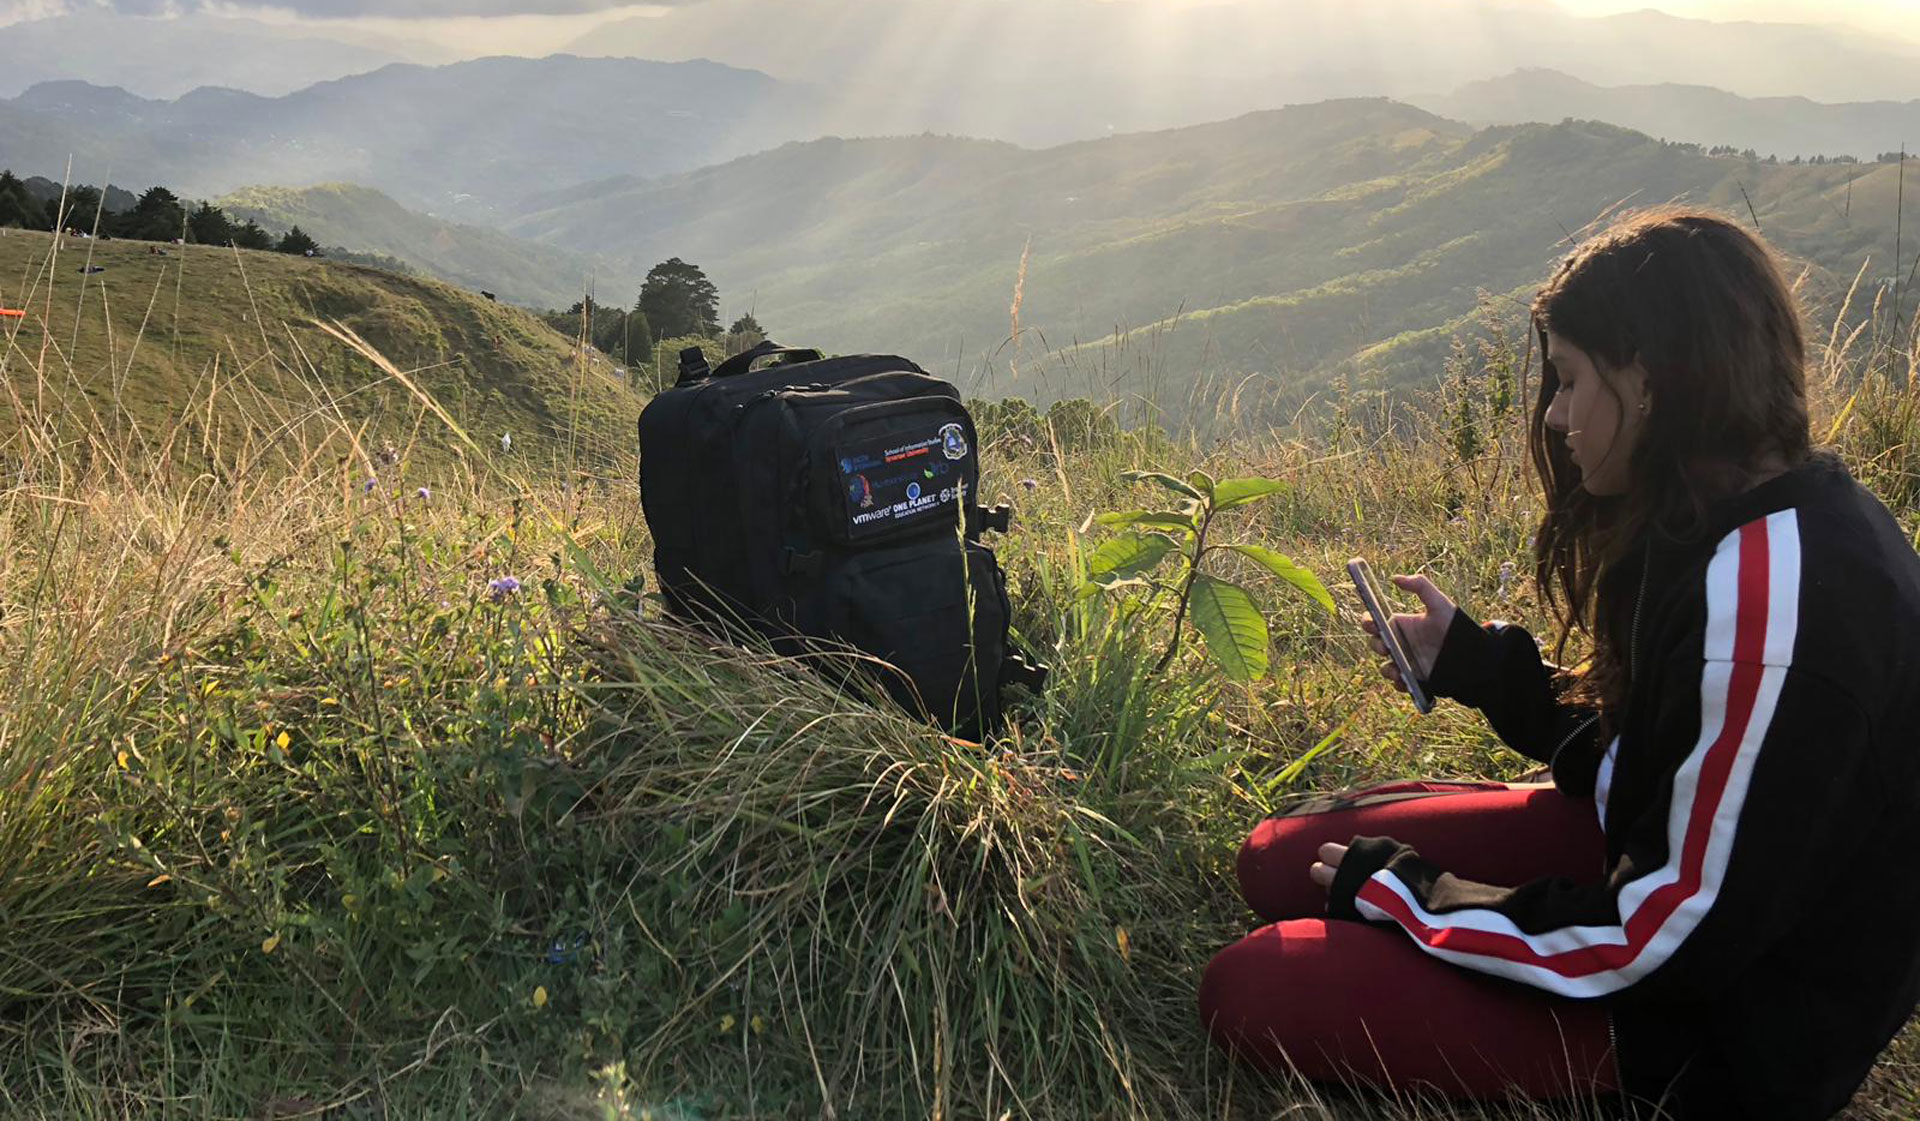 Imcon backpack in Costa Rica